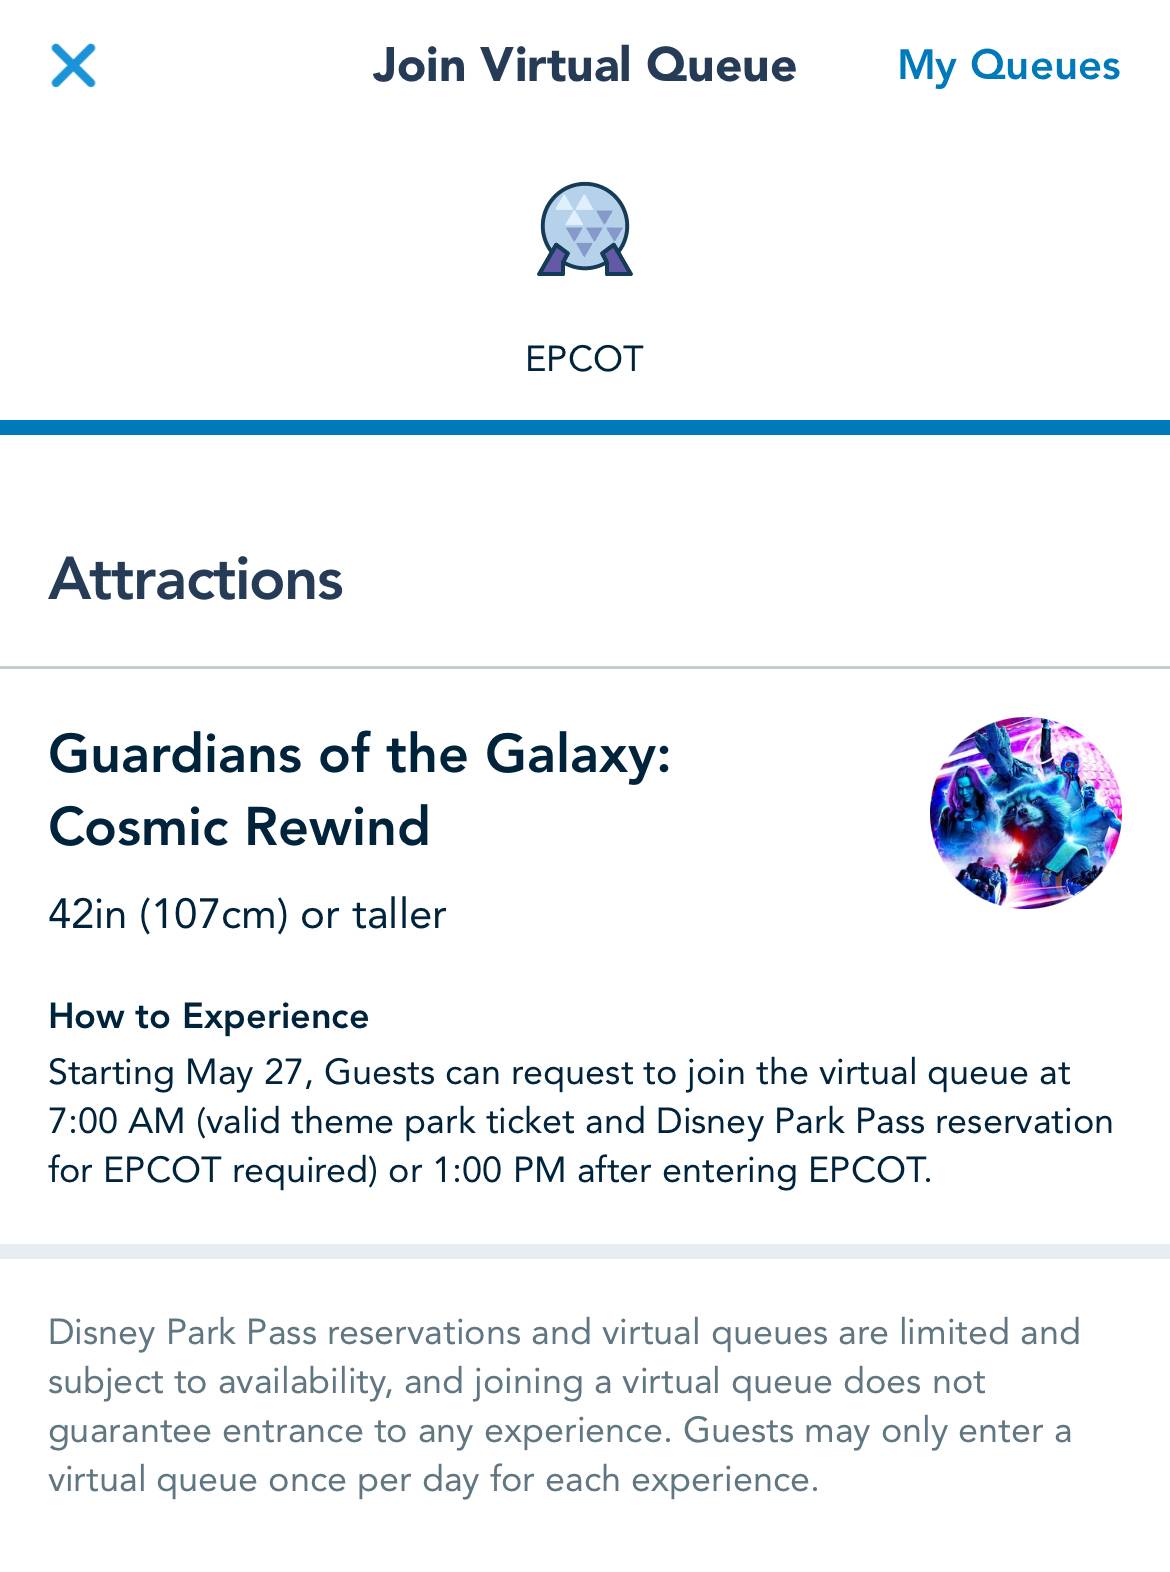 Guardians of the Galaxy Cosmic Rewind Virtual Queue screenshot from My Disney Experience